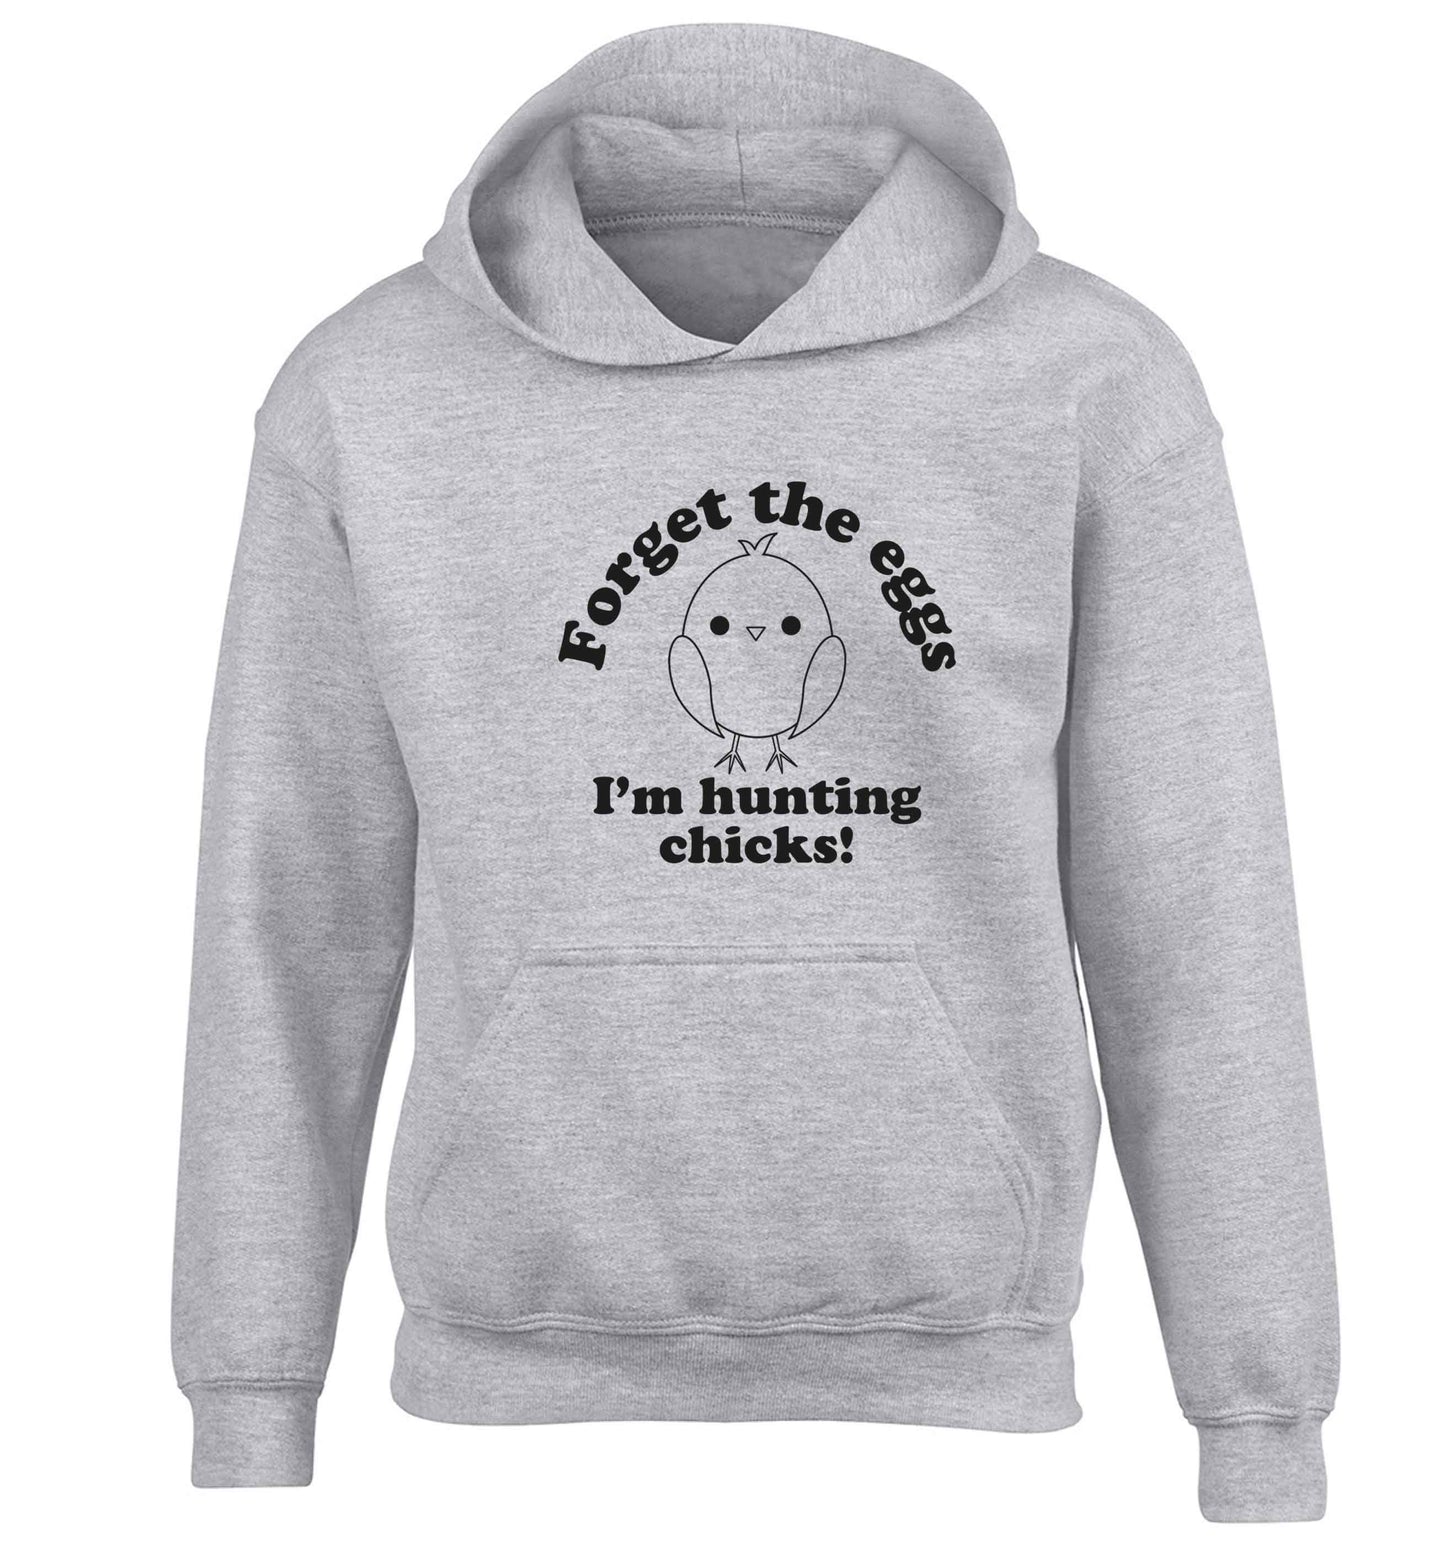 Forget the eggs I'm hunting chicks! children's grey hoodie 12-13 Years